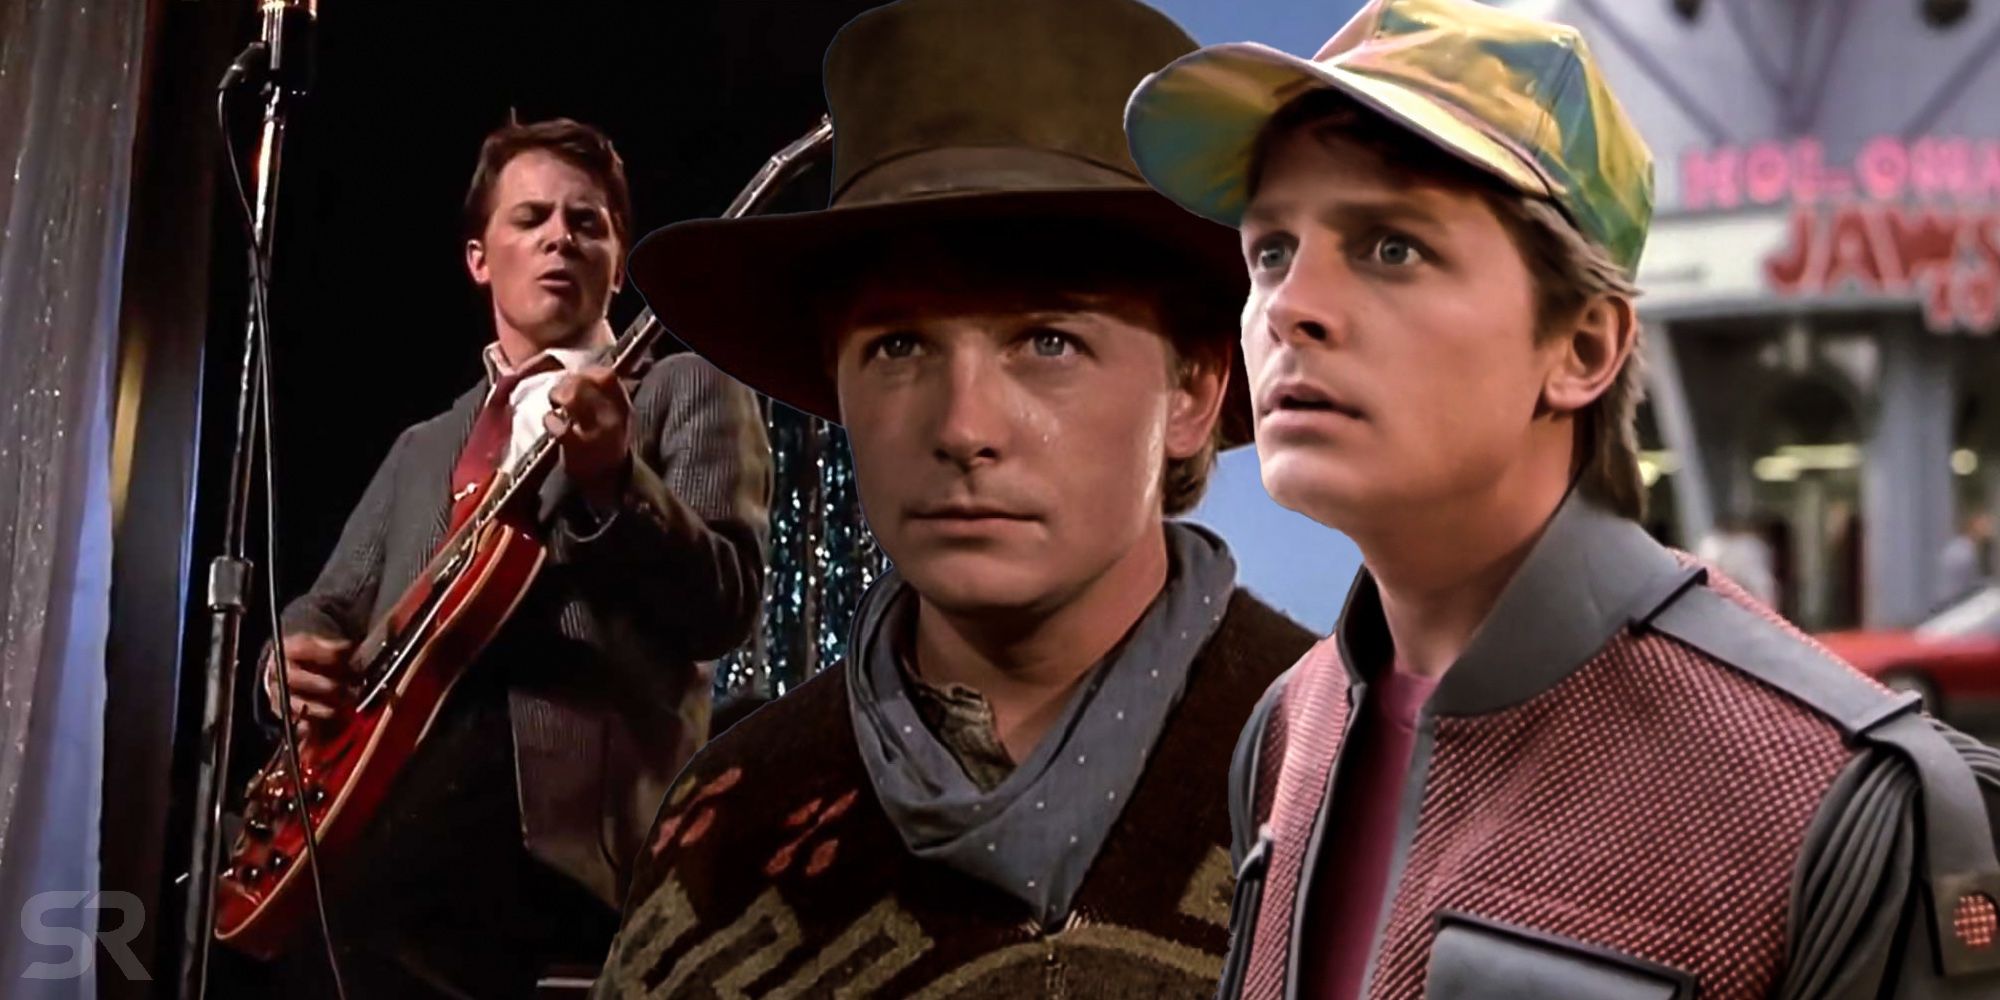 Back To The Future’s Lorraine Actor Revisits Iconic Location In Cheeky Photo